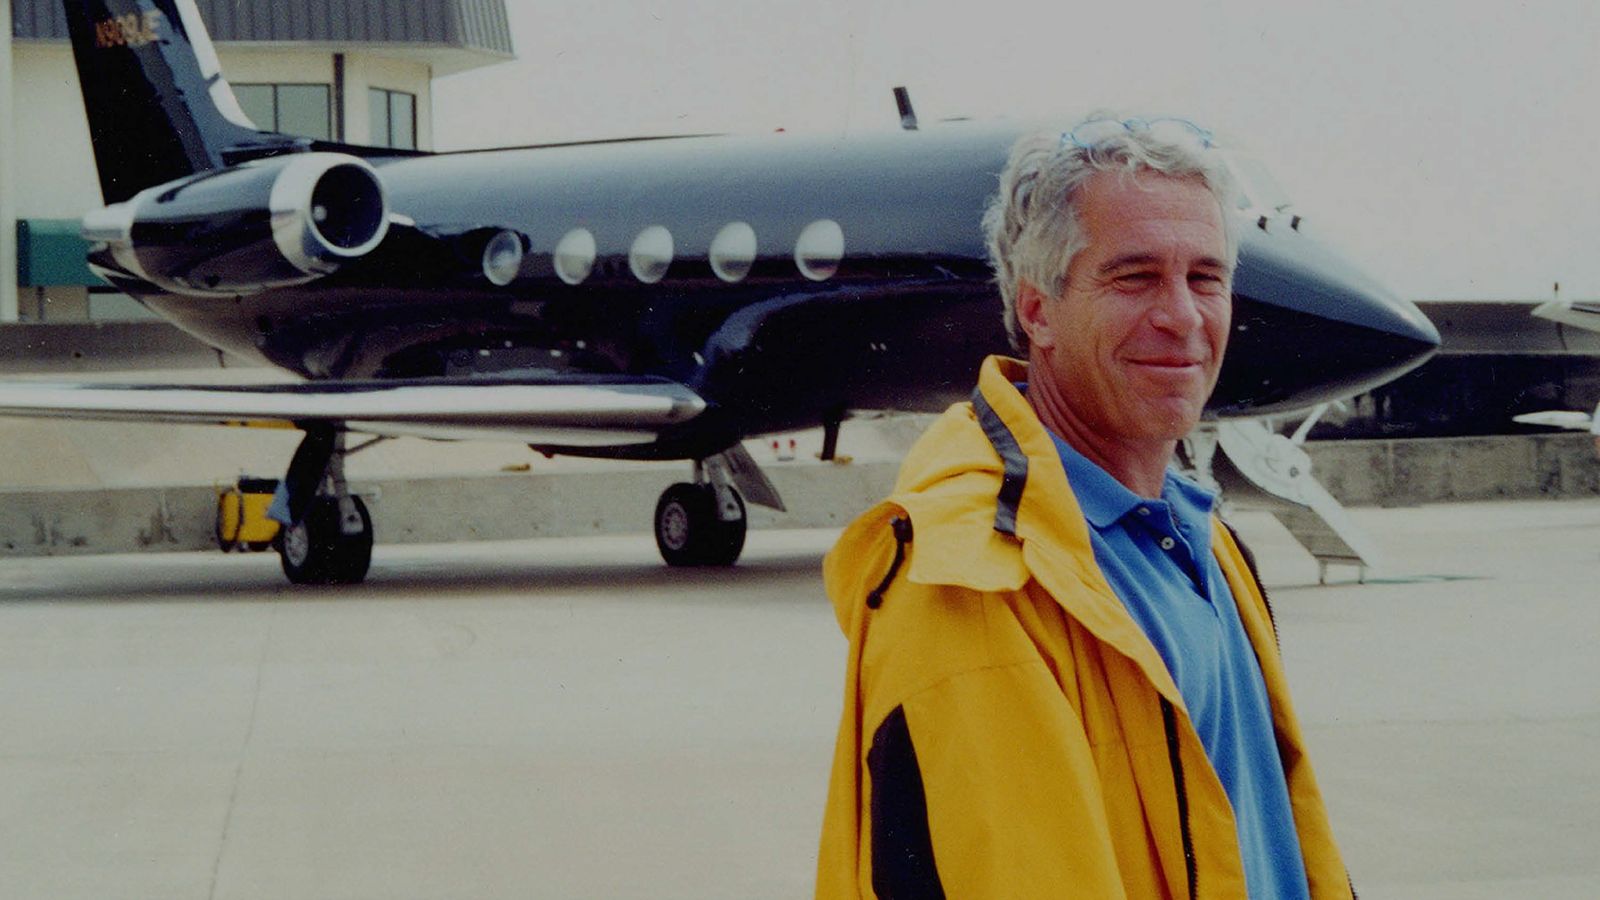 Jeffrey Epstein pictured in front of one of his private jets